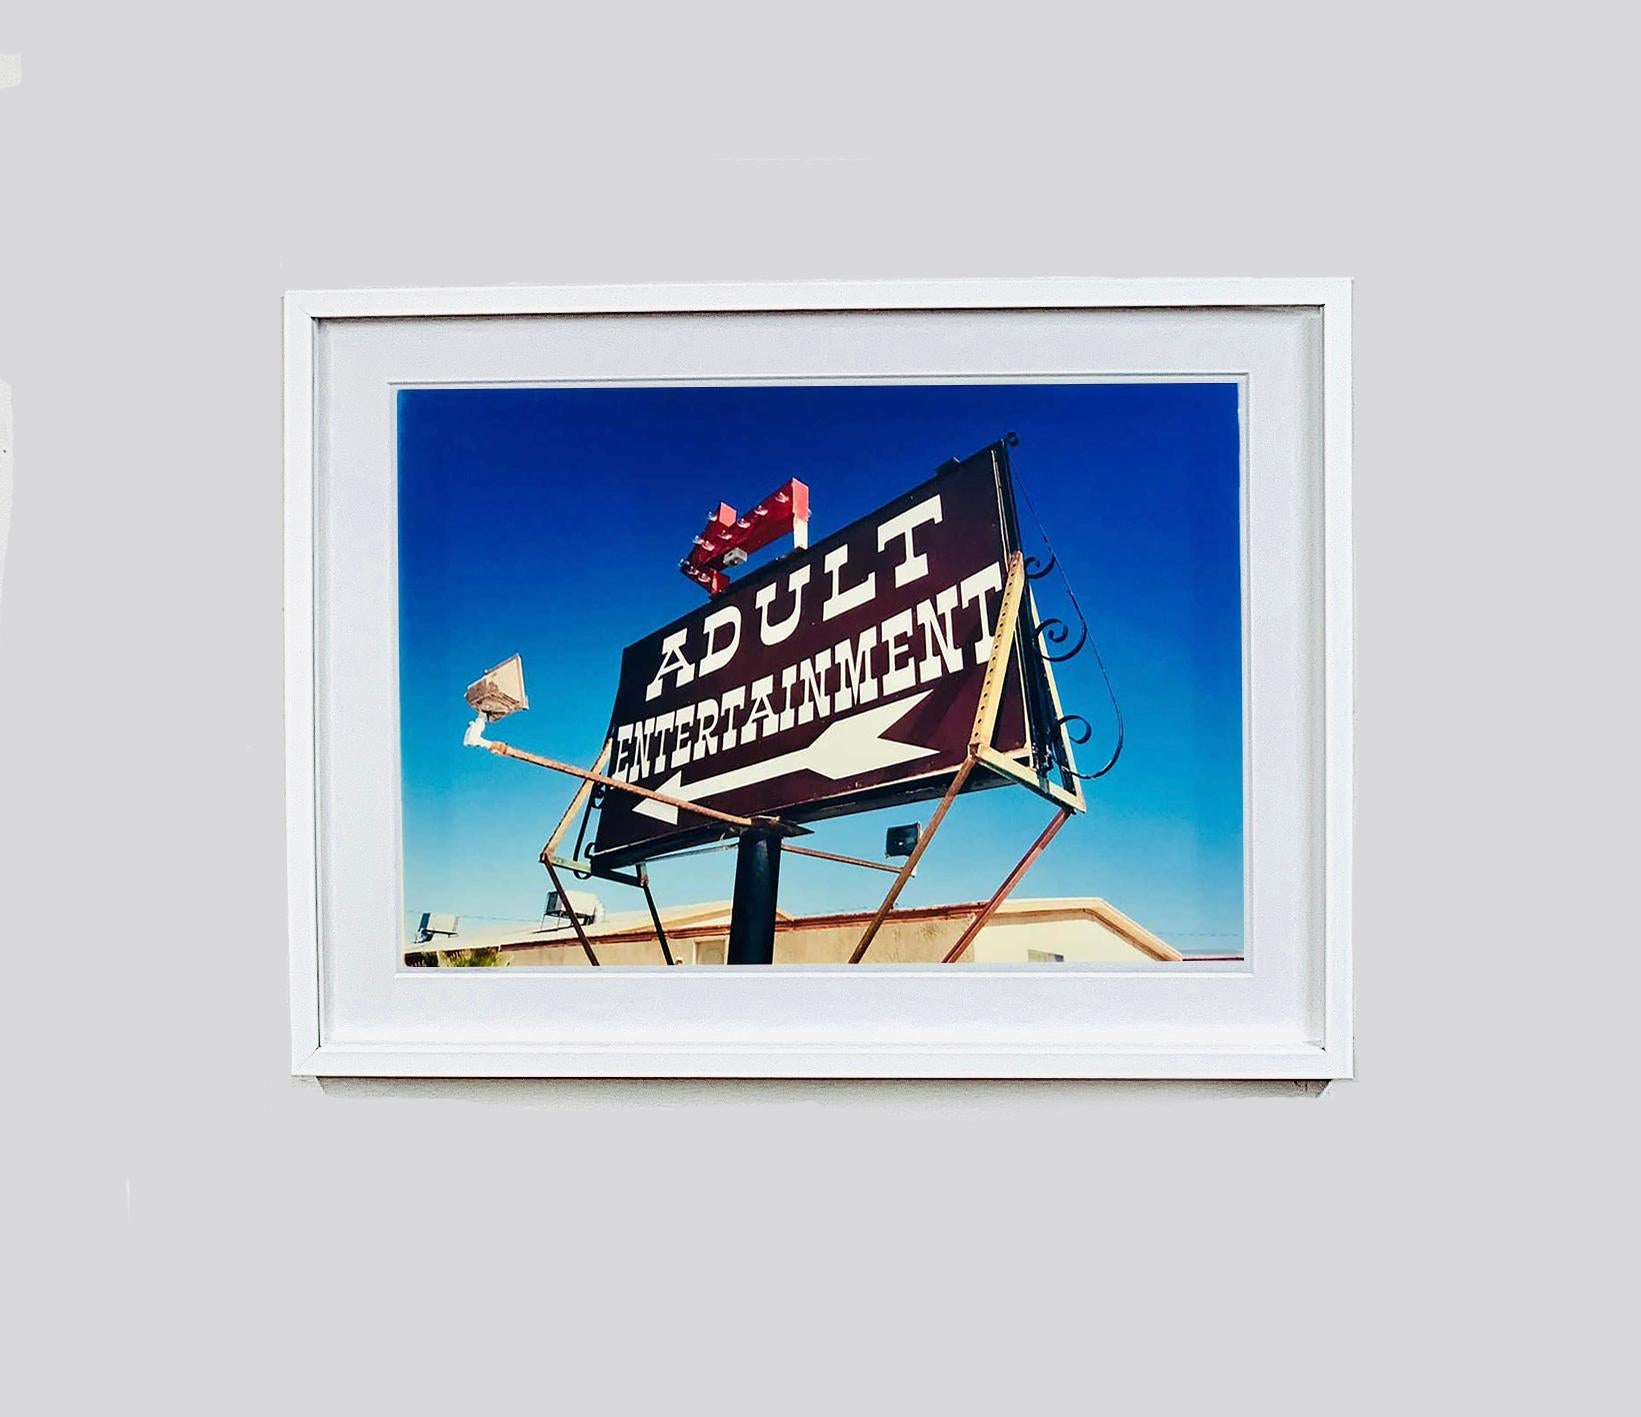 Fun pop art typography, a total 'Sign Porn' fix, captured on an American road trip in Nevada. This artwork features in Richard Heeps' sold out book 'Man's Ruin' and an edition of this artwork sold at auction in London at The Auction Collective's